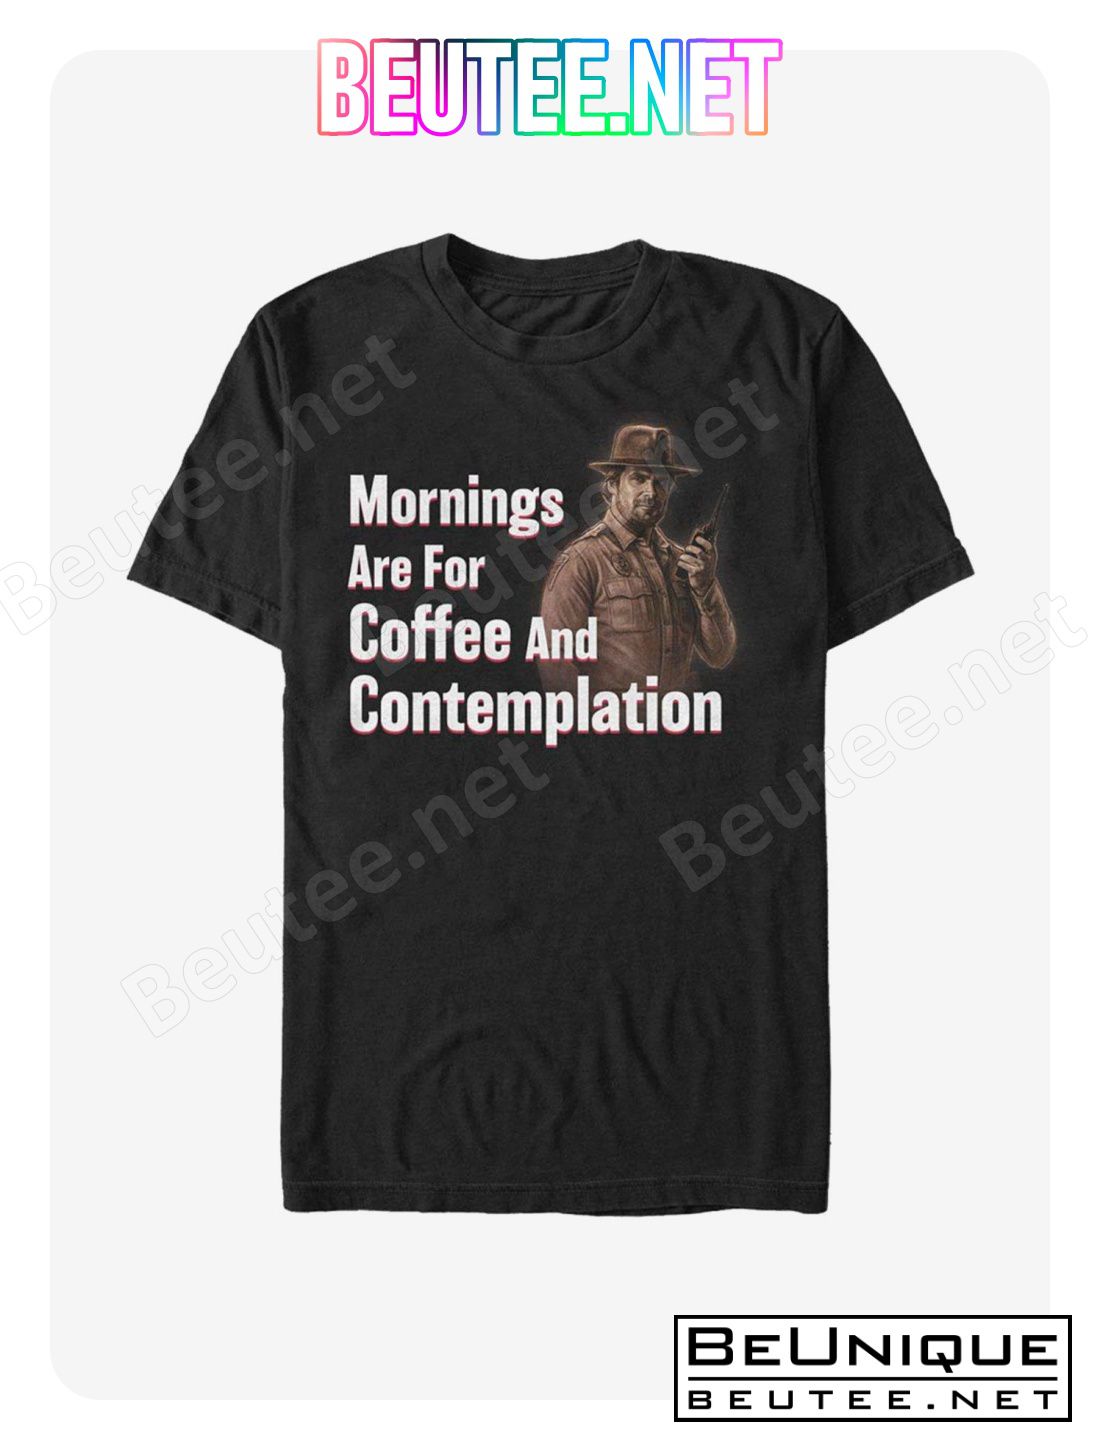 Mens Tee - Coffee and Contemplation - BLACK